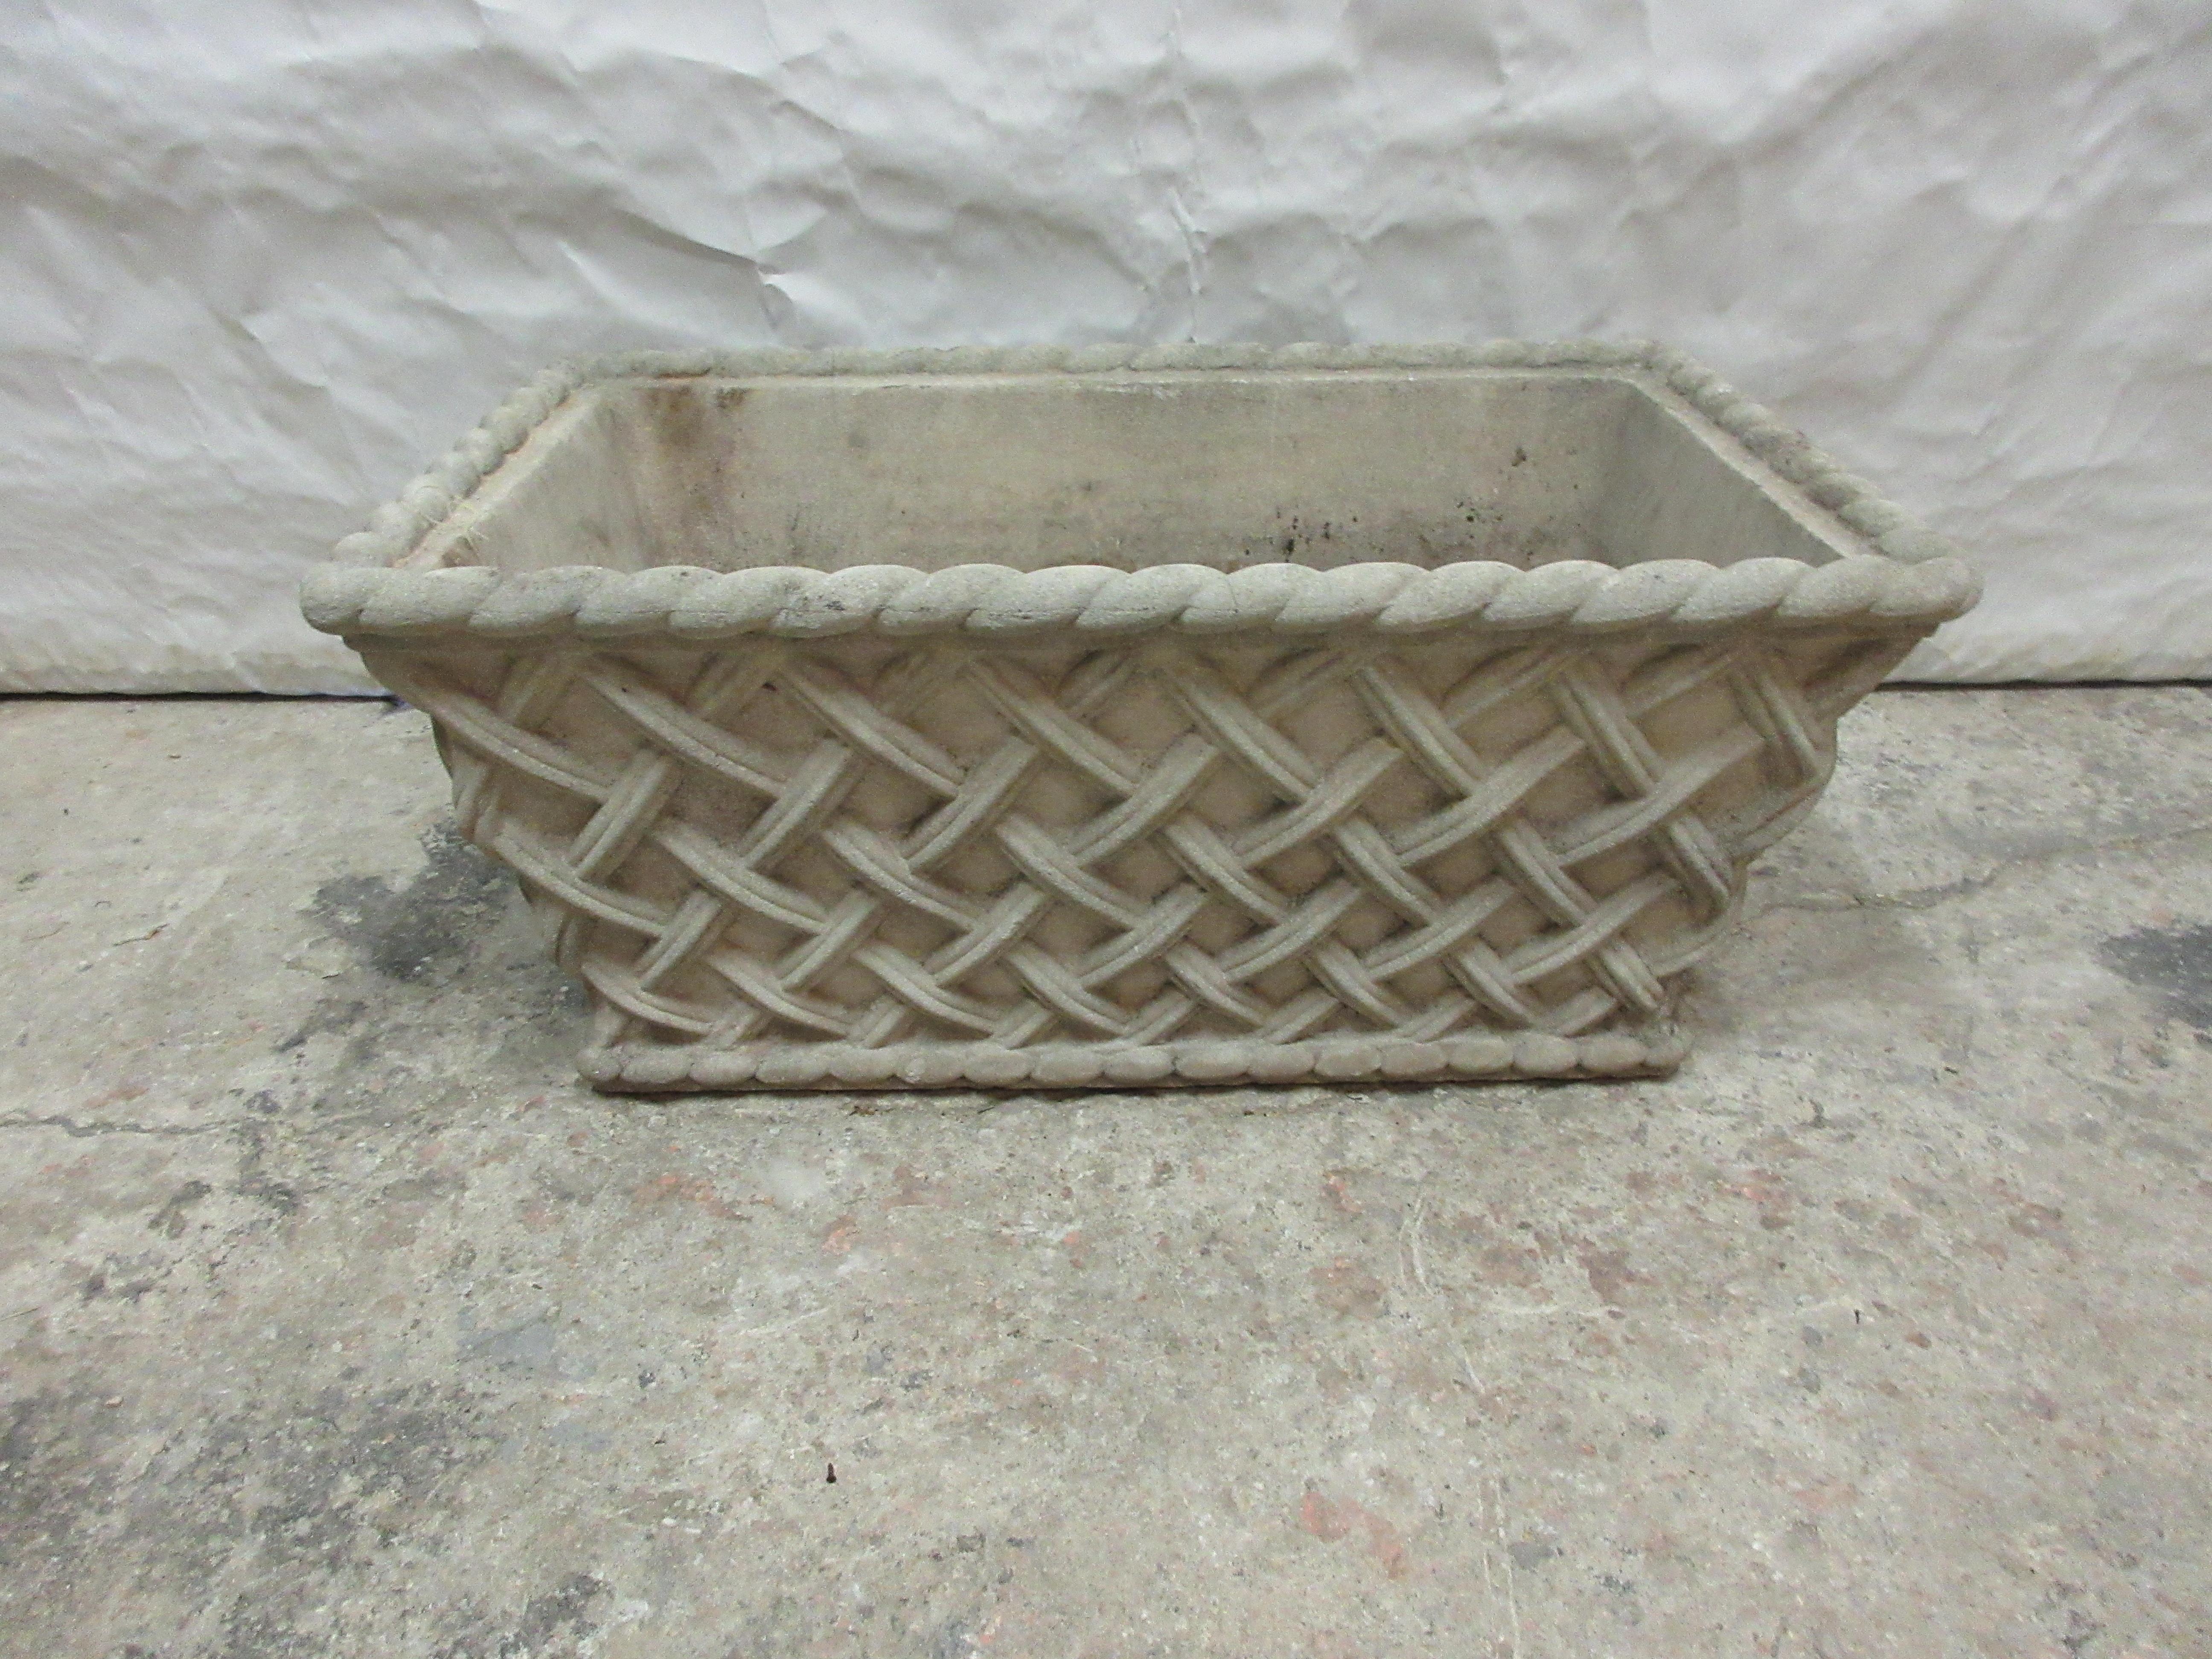 This is a Rare and unique Rare Basket Weave Planter. its in Great shape for its age.